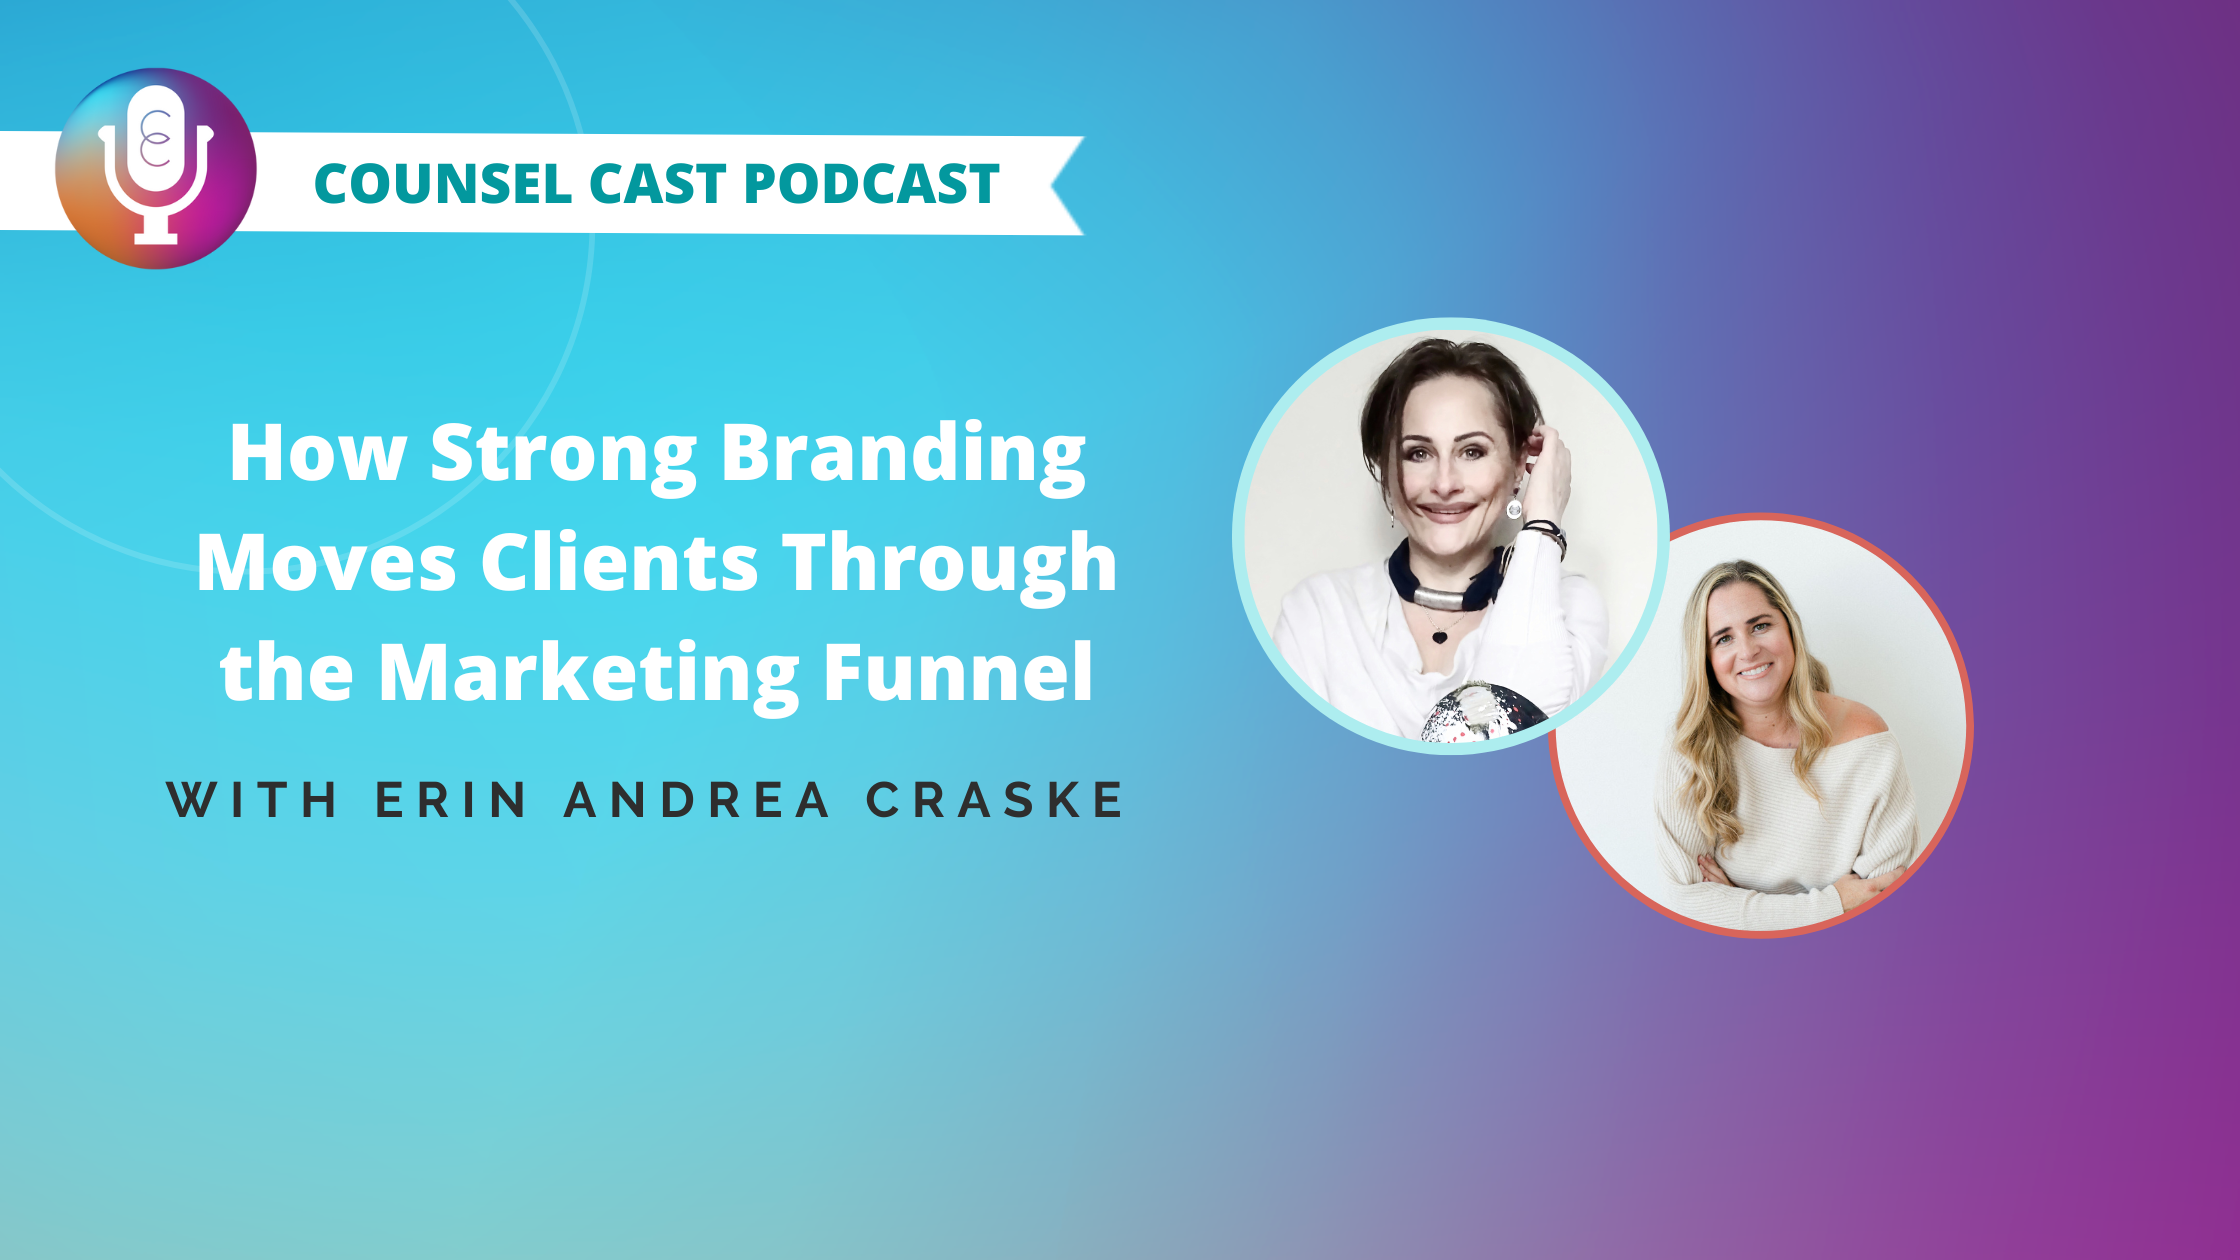 How Strong Branding Moves Clients Through the Marketing Funnel with Erin Andrea Craske